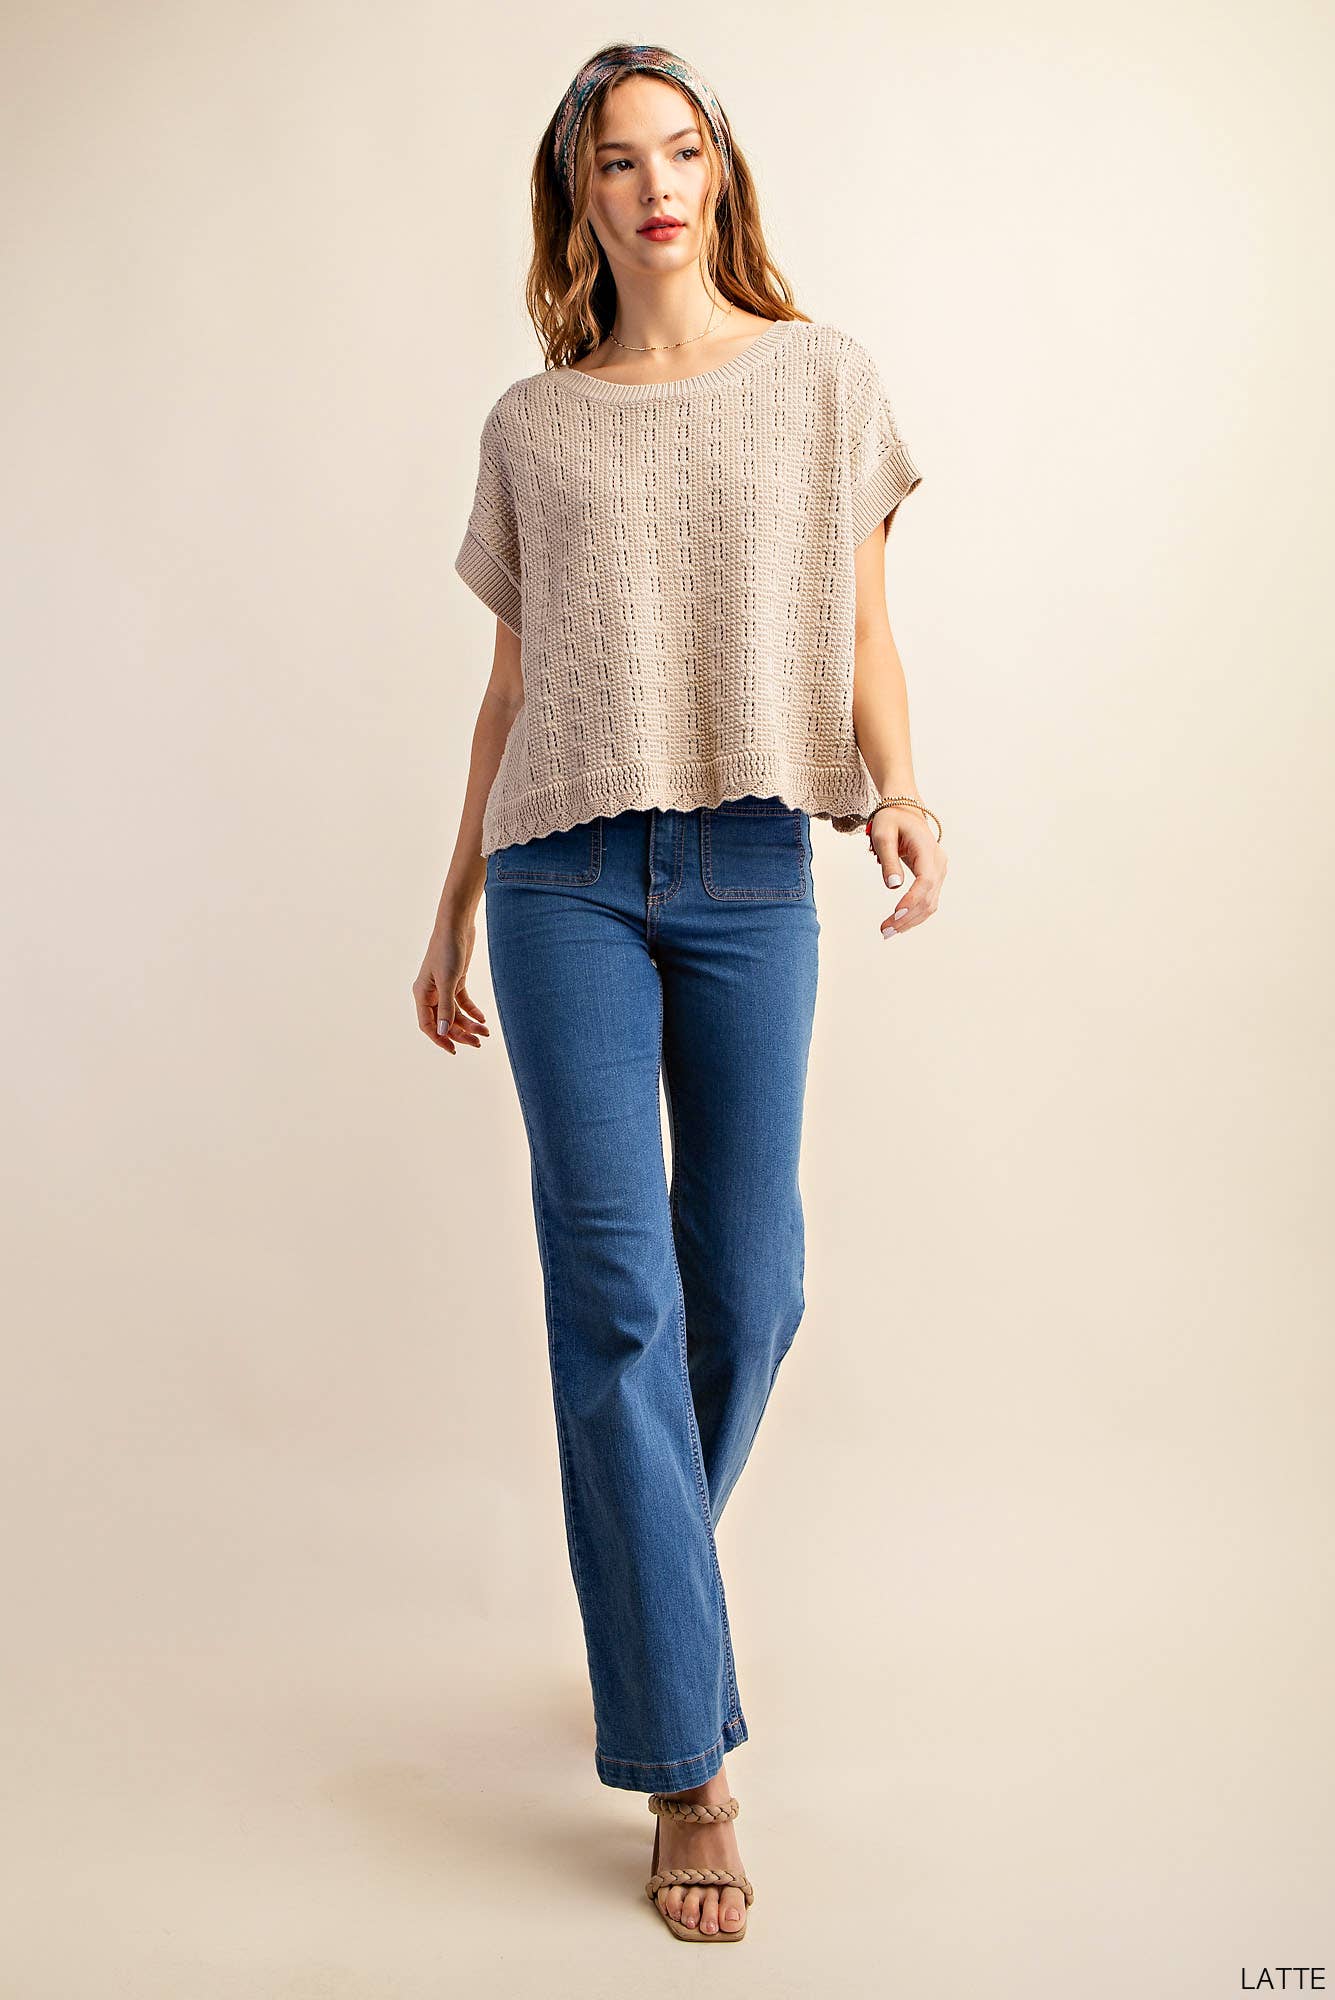 LATTE COTTON THREAD TEXTURE RELAX FIT SWEATER TOP